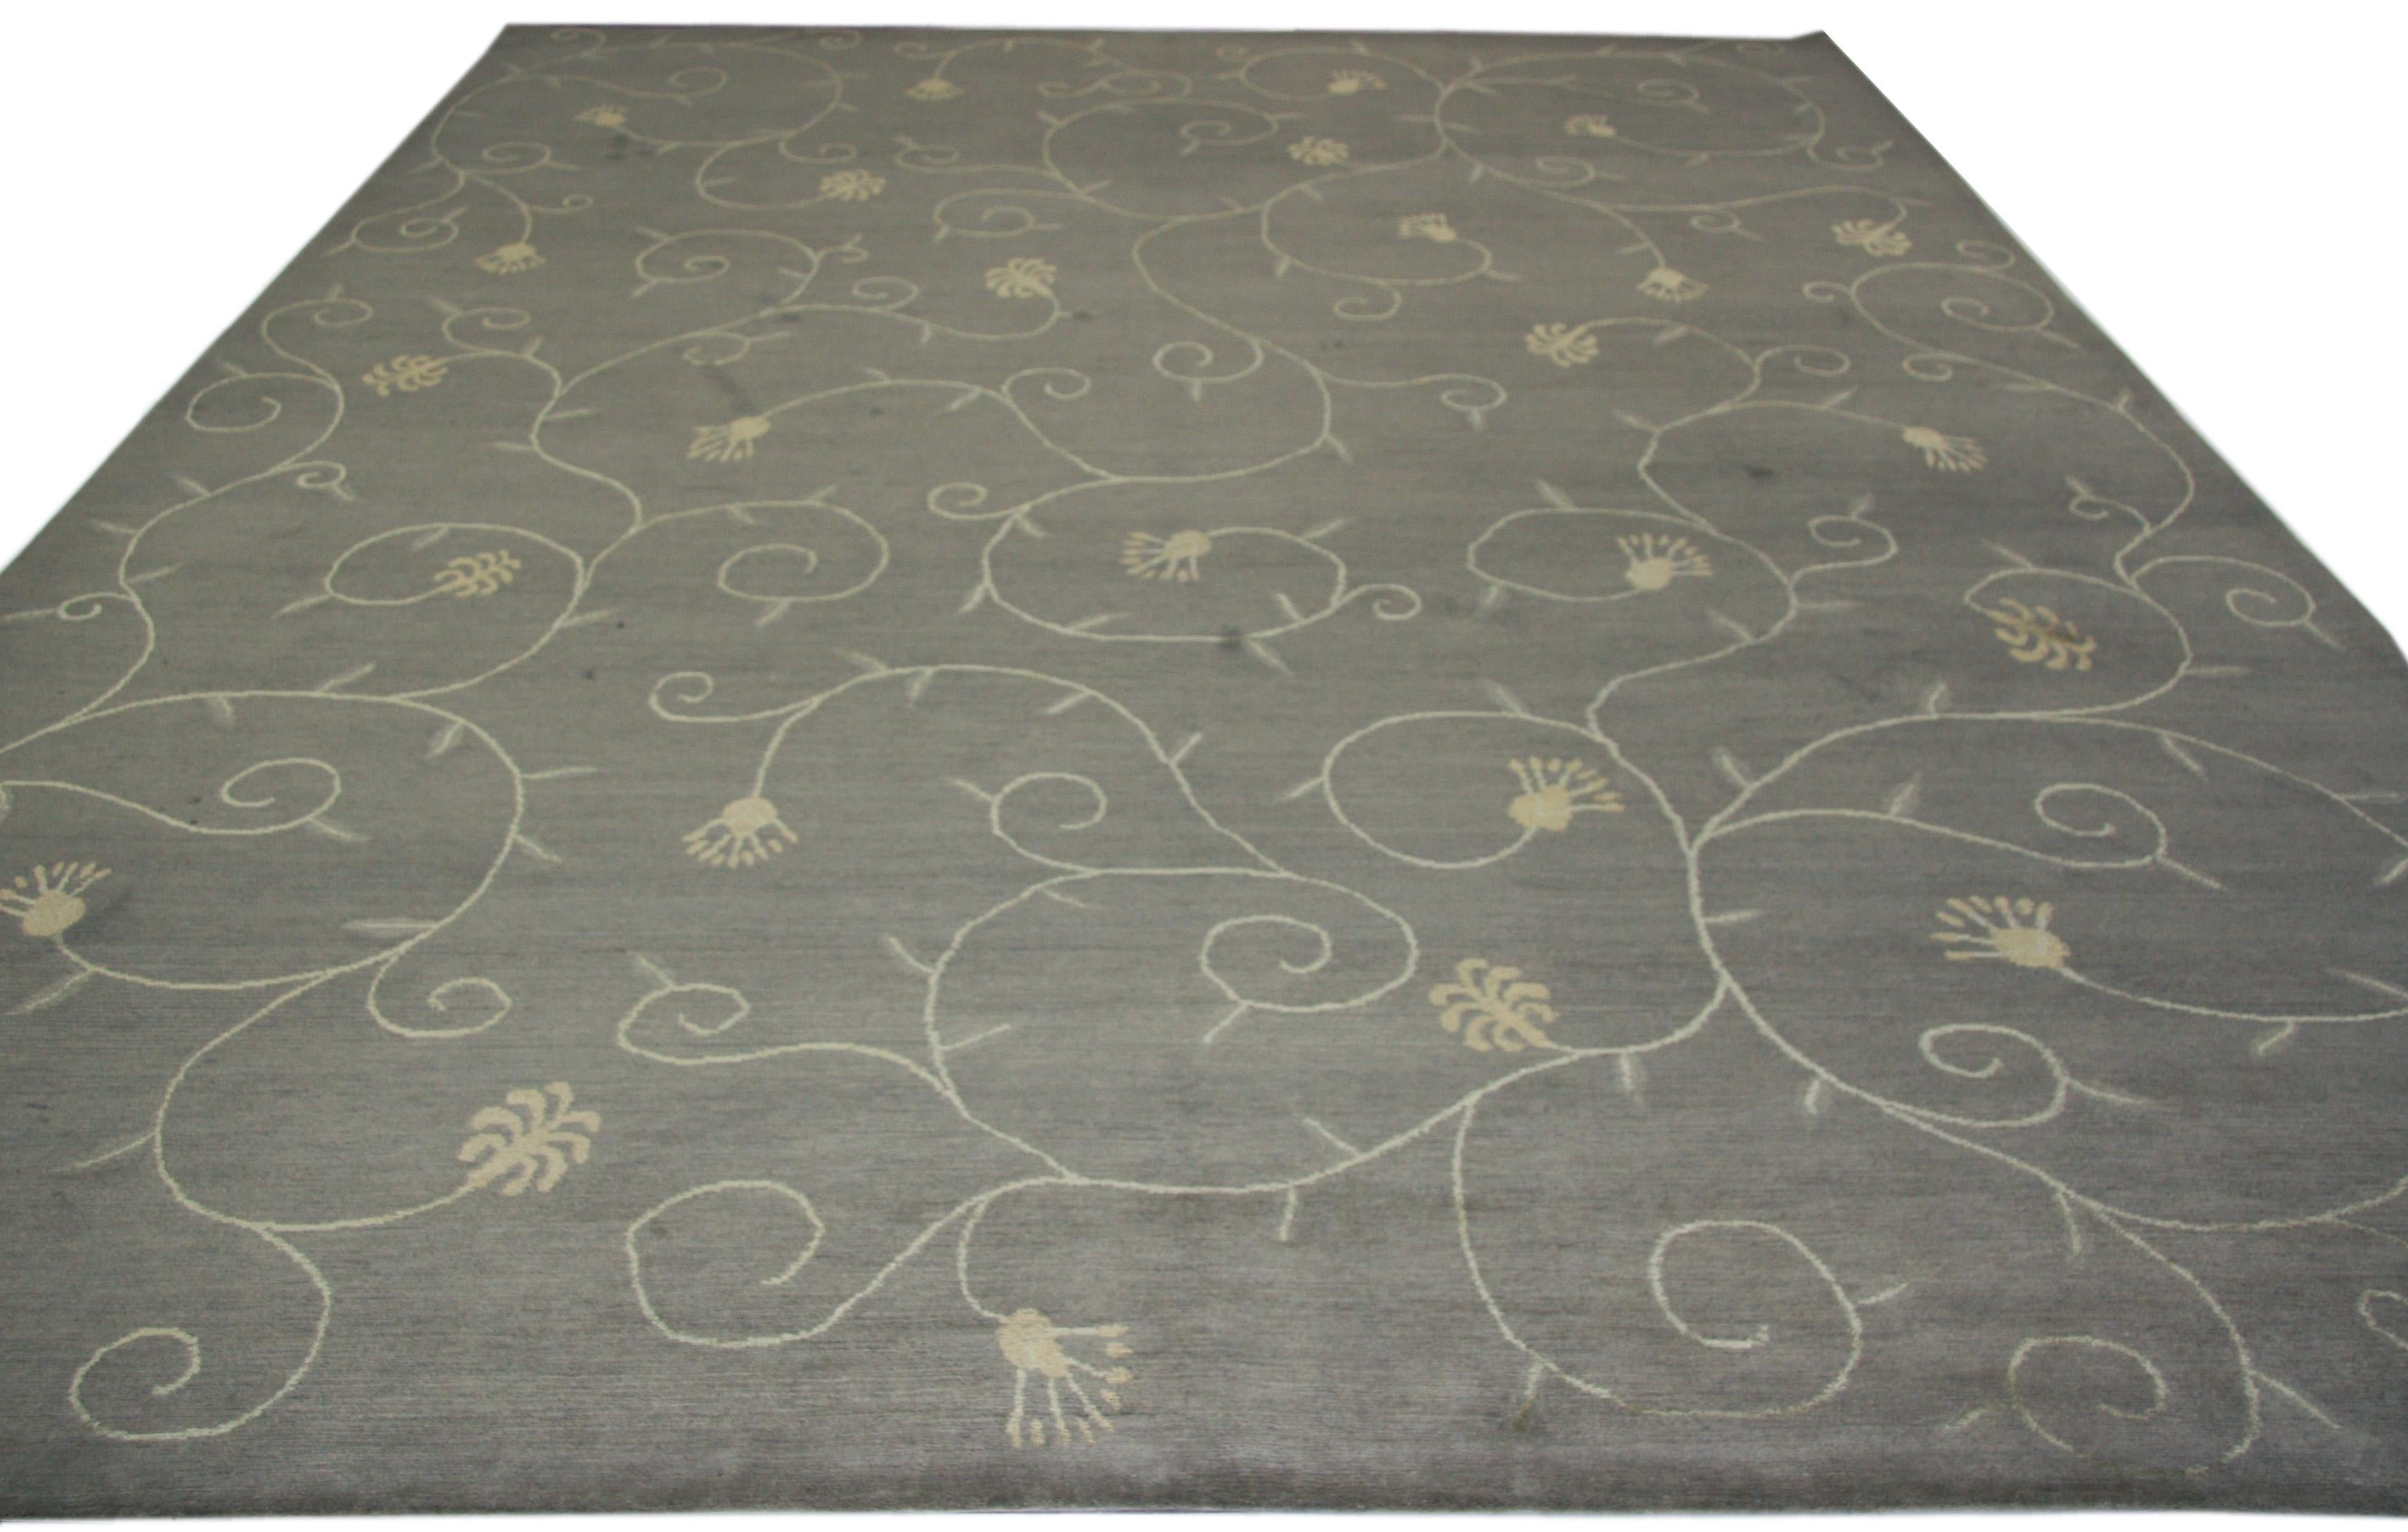 Elegant Tibetan style area rug with whimsical stylized floral scroll.  Hand-knotted in Nepal.  Wool makes the piece both durable and comfortable underfoot.  Taupe/Grey, gold and ivory tones with a 'light' and 'dark' side depending on the angle of